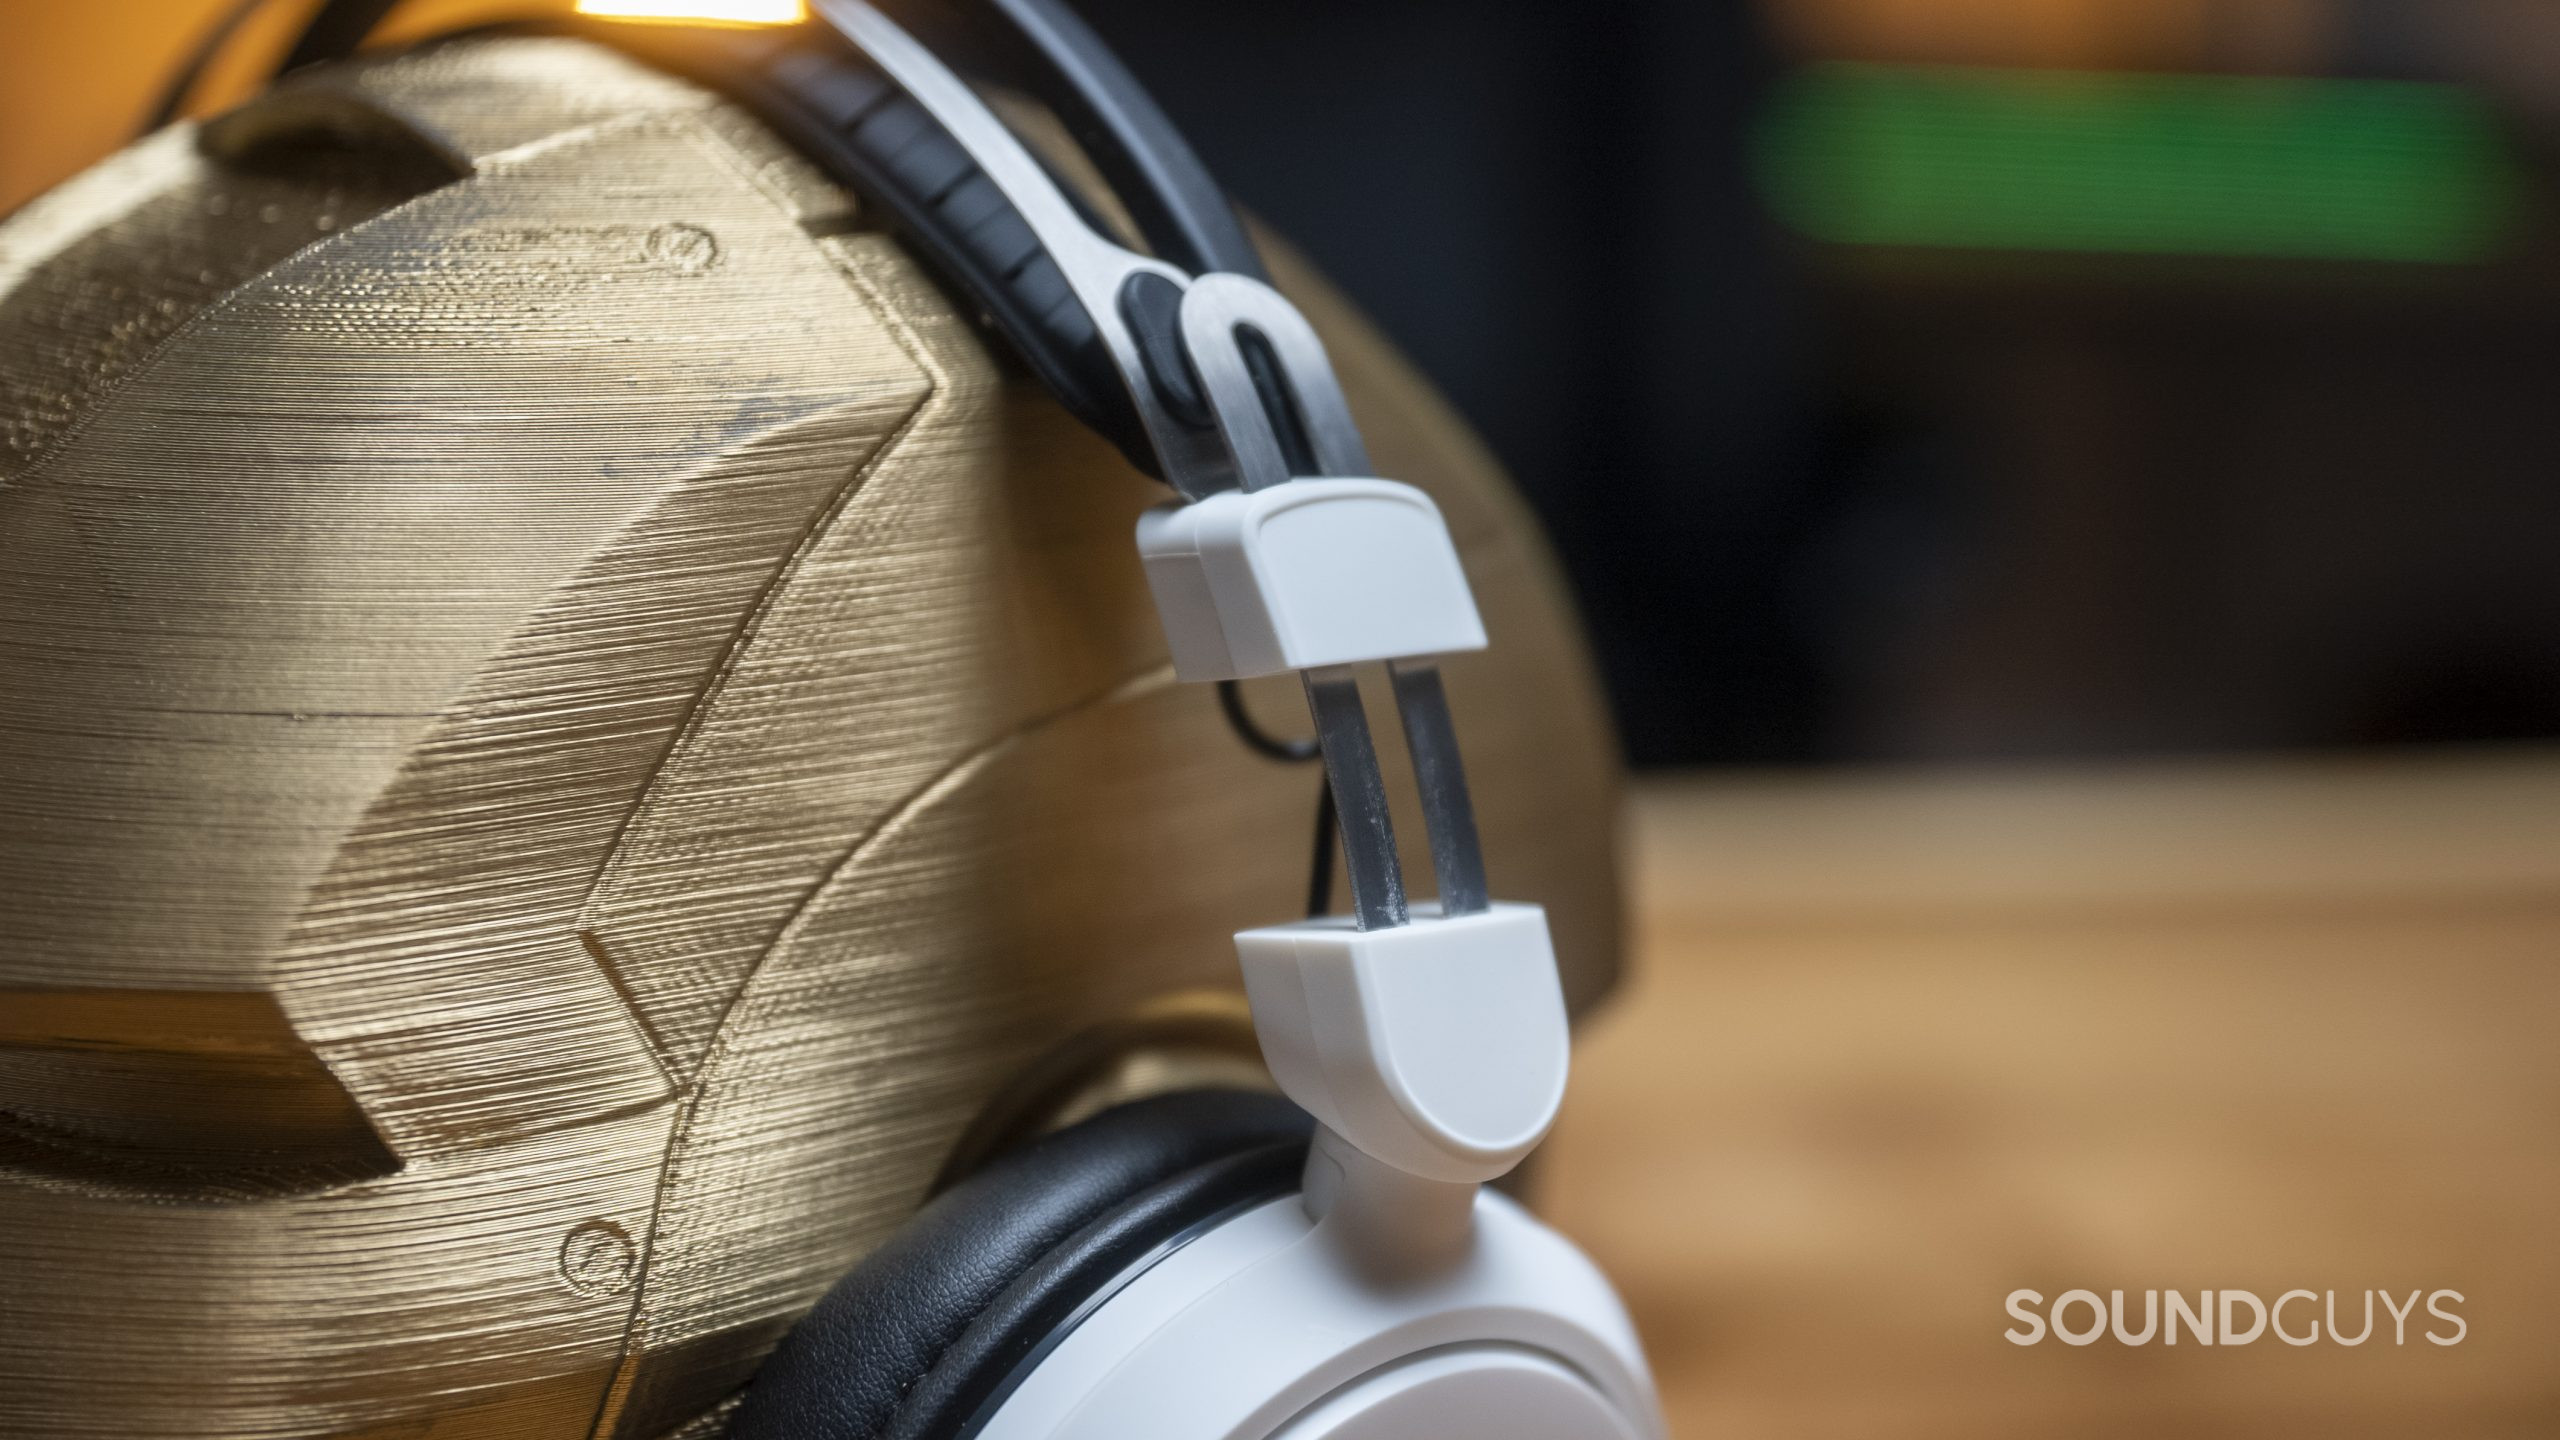 The Audio-Technica ATH-GL3 gaming headset's expanded headband as it rests on a wooden head.